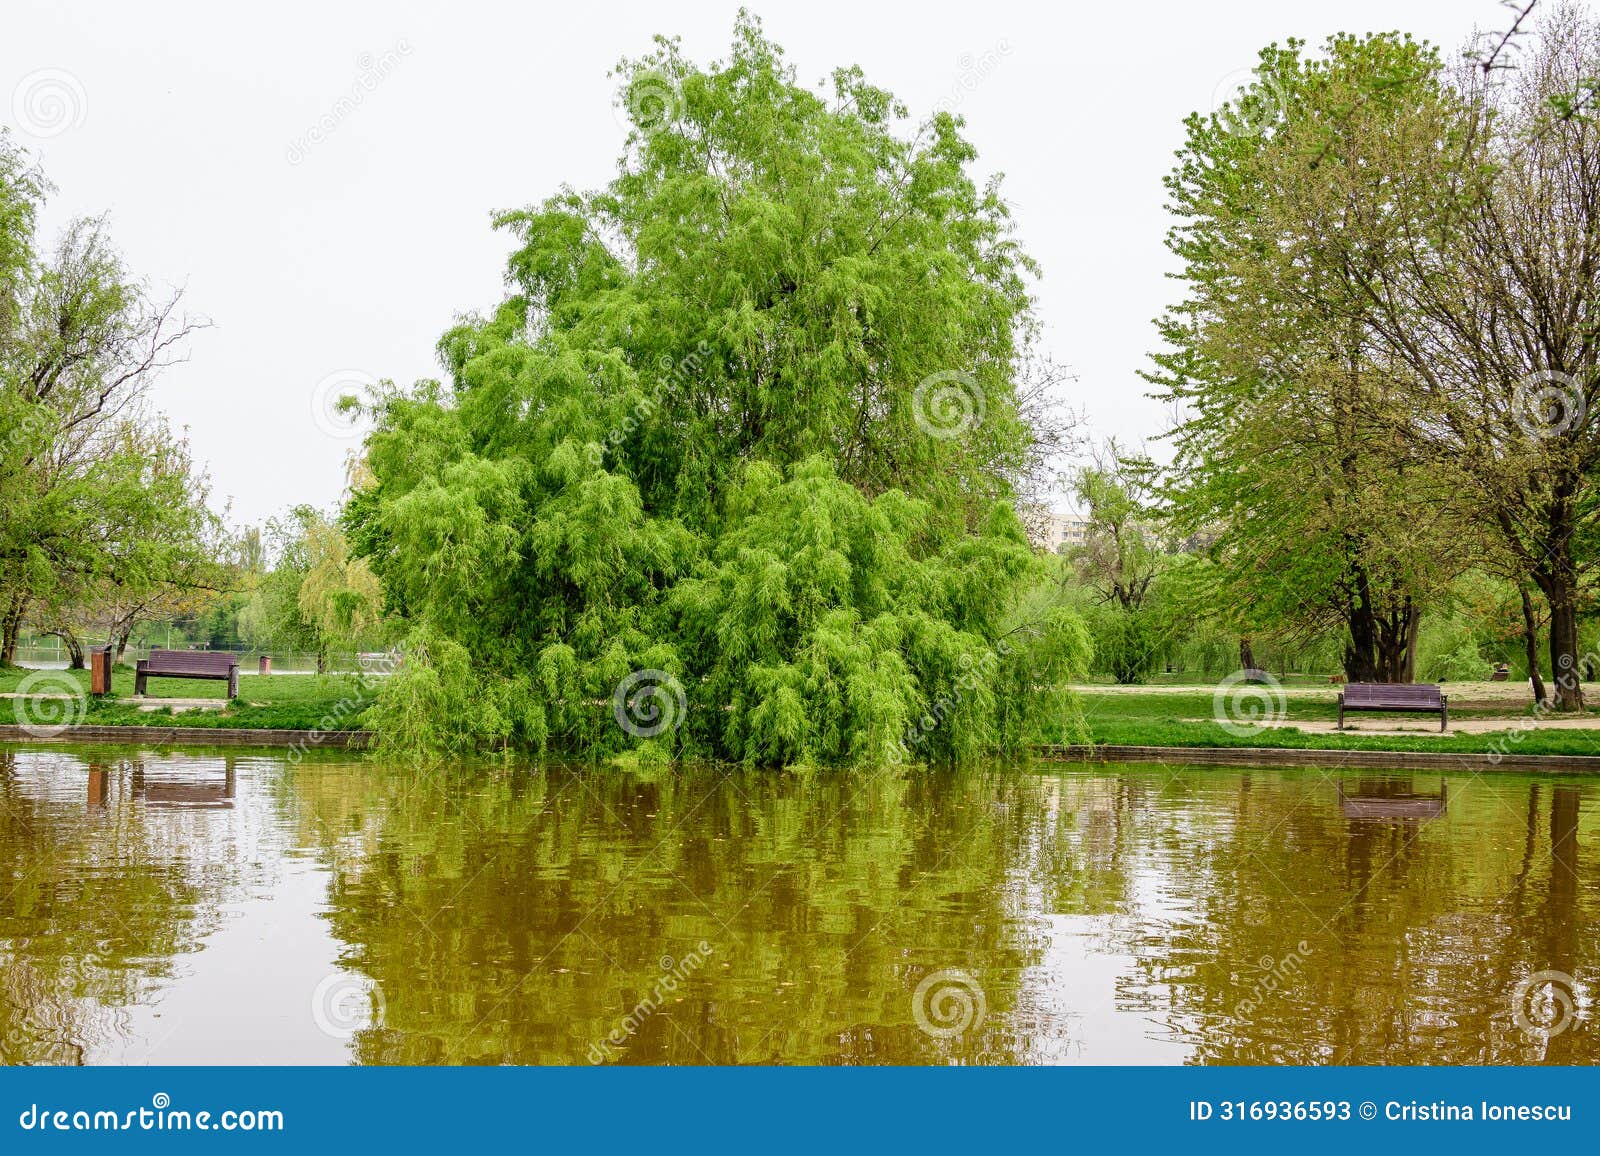 water and green weeping willow trees on the shoreline of titan lake in alexandru ioan cuza (ior) park in bucharest